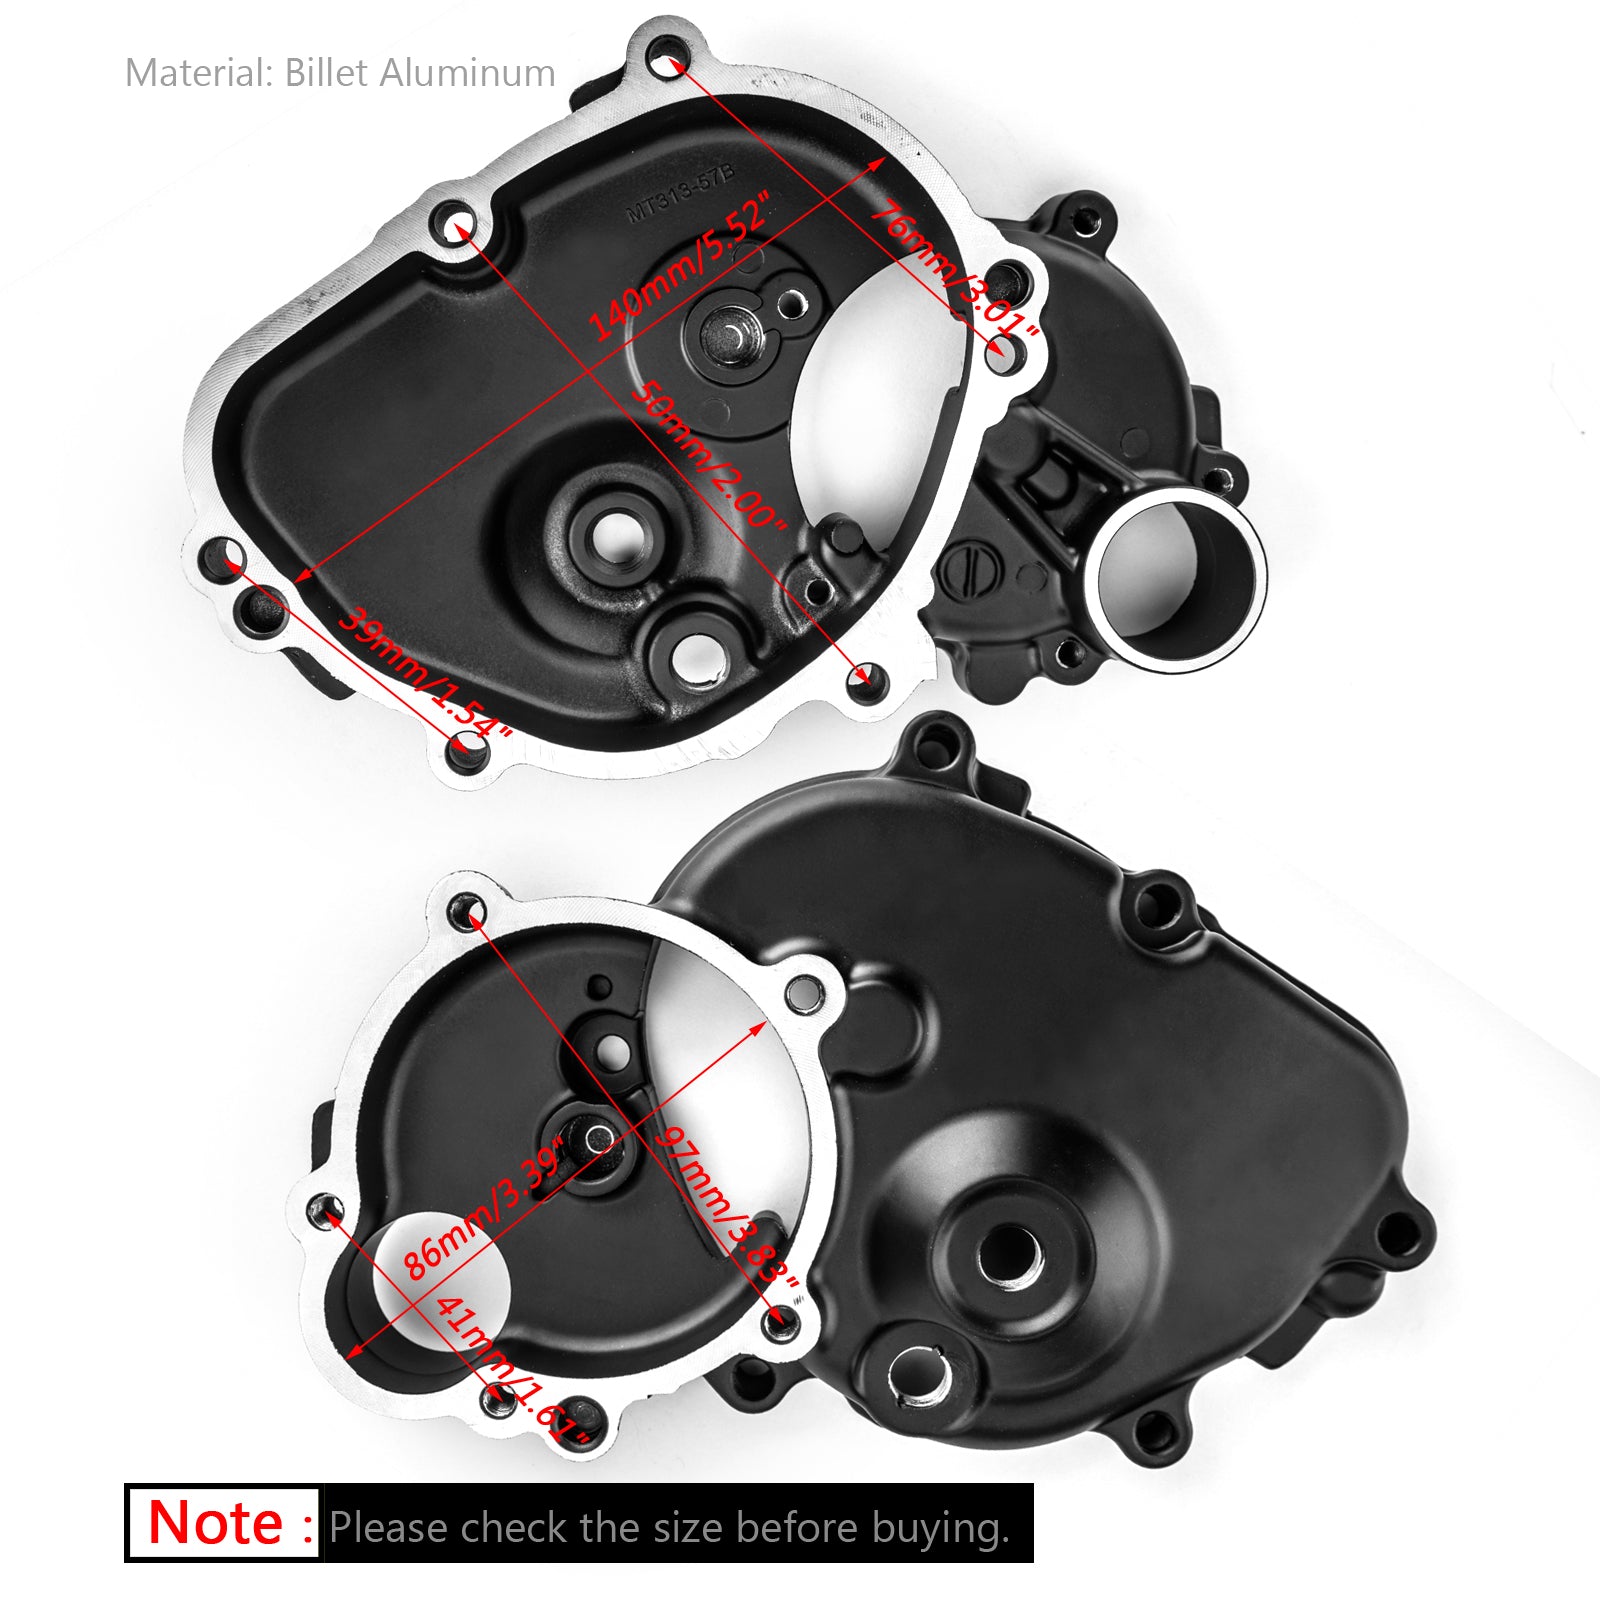 Alternator Stator Engine Cover Crankcase Fit for Kawasaki ZX6R ZX-6R 2009-2011